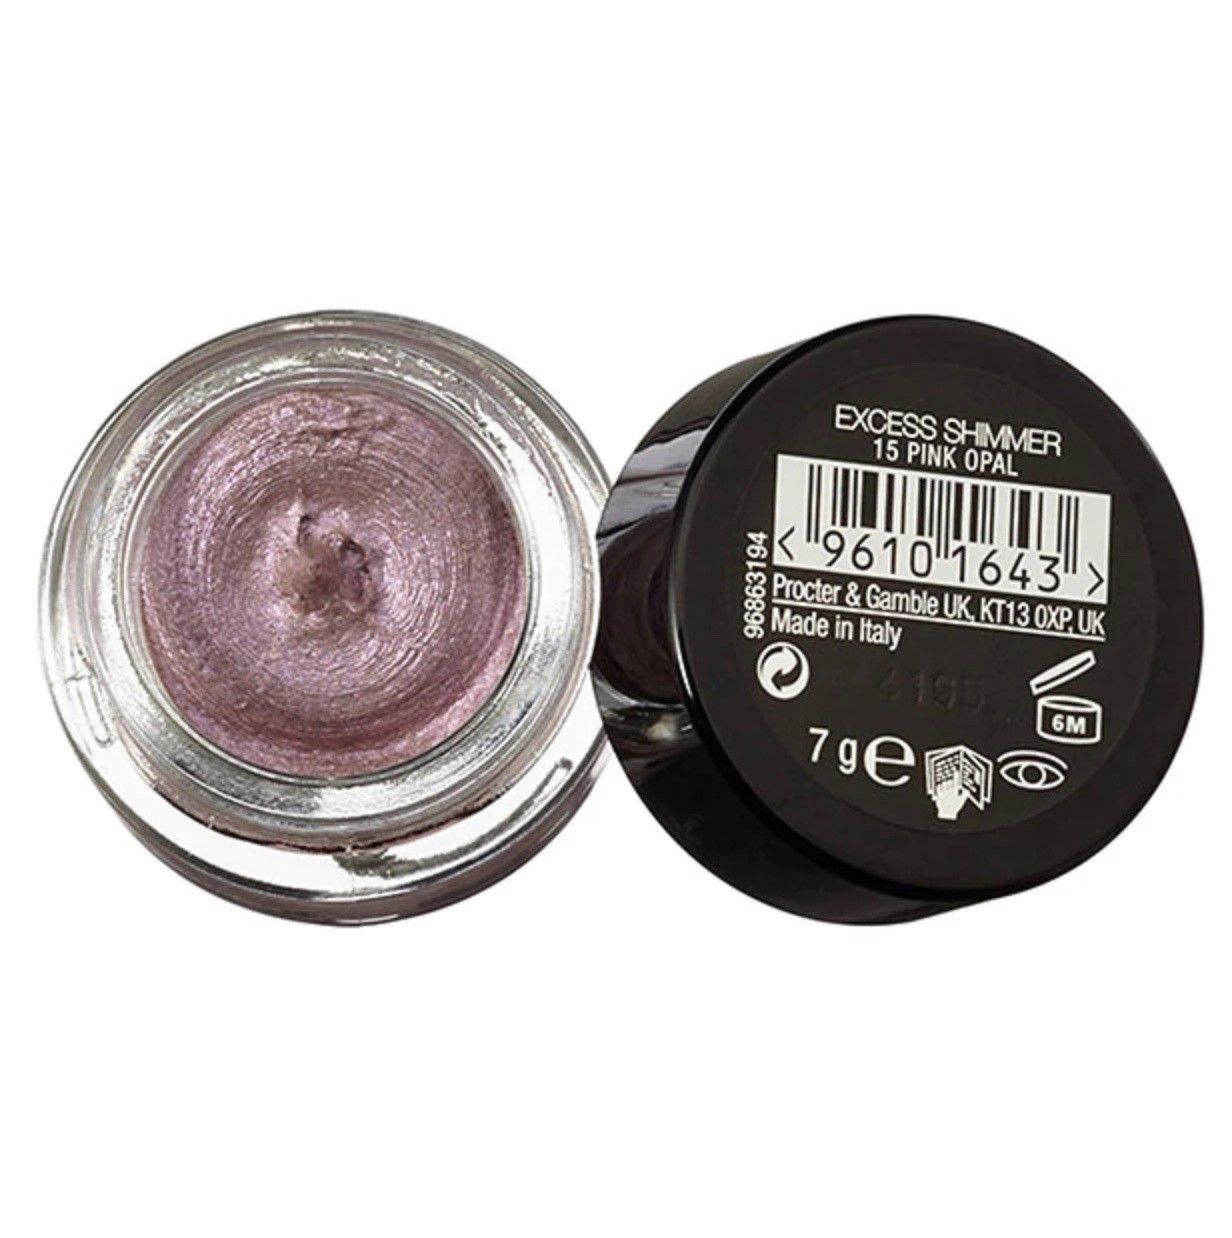 Eyeshadow Excess Shimmer 15 Pink Opal